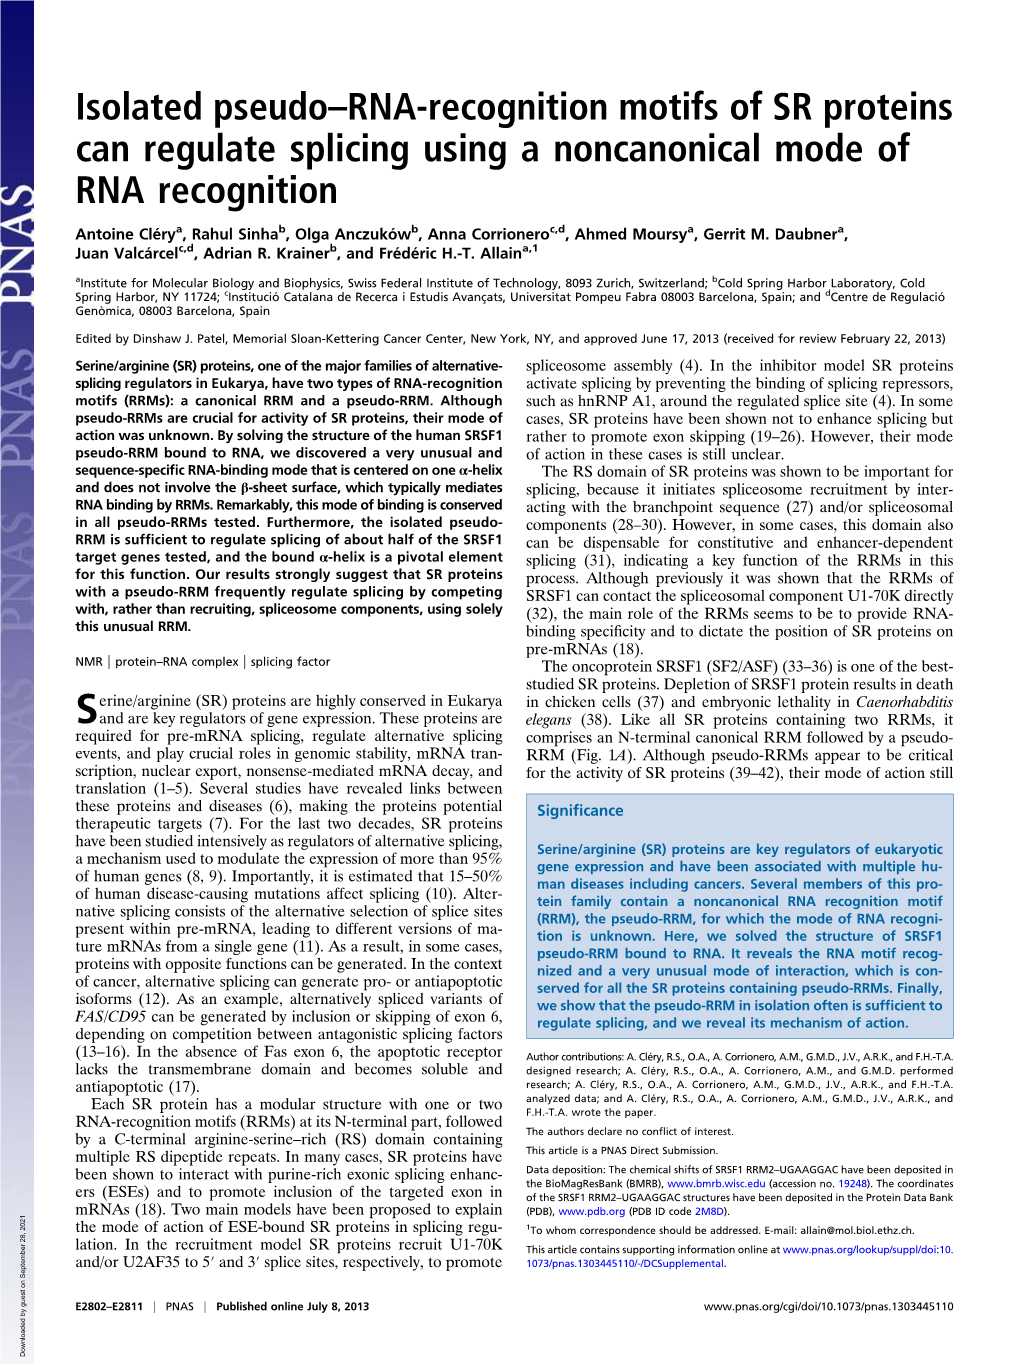 Isolated Pseudo–RNA-Recognition Motifs of SR Proteins Can Regulate Splicing Using a Noncanonical Mode of RNA Recognition